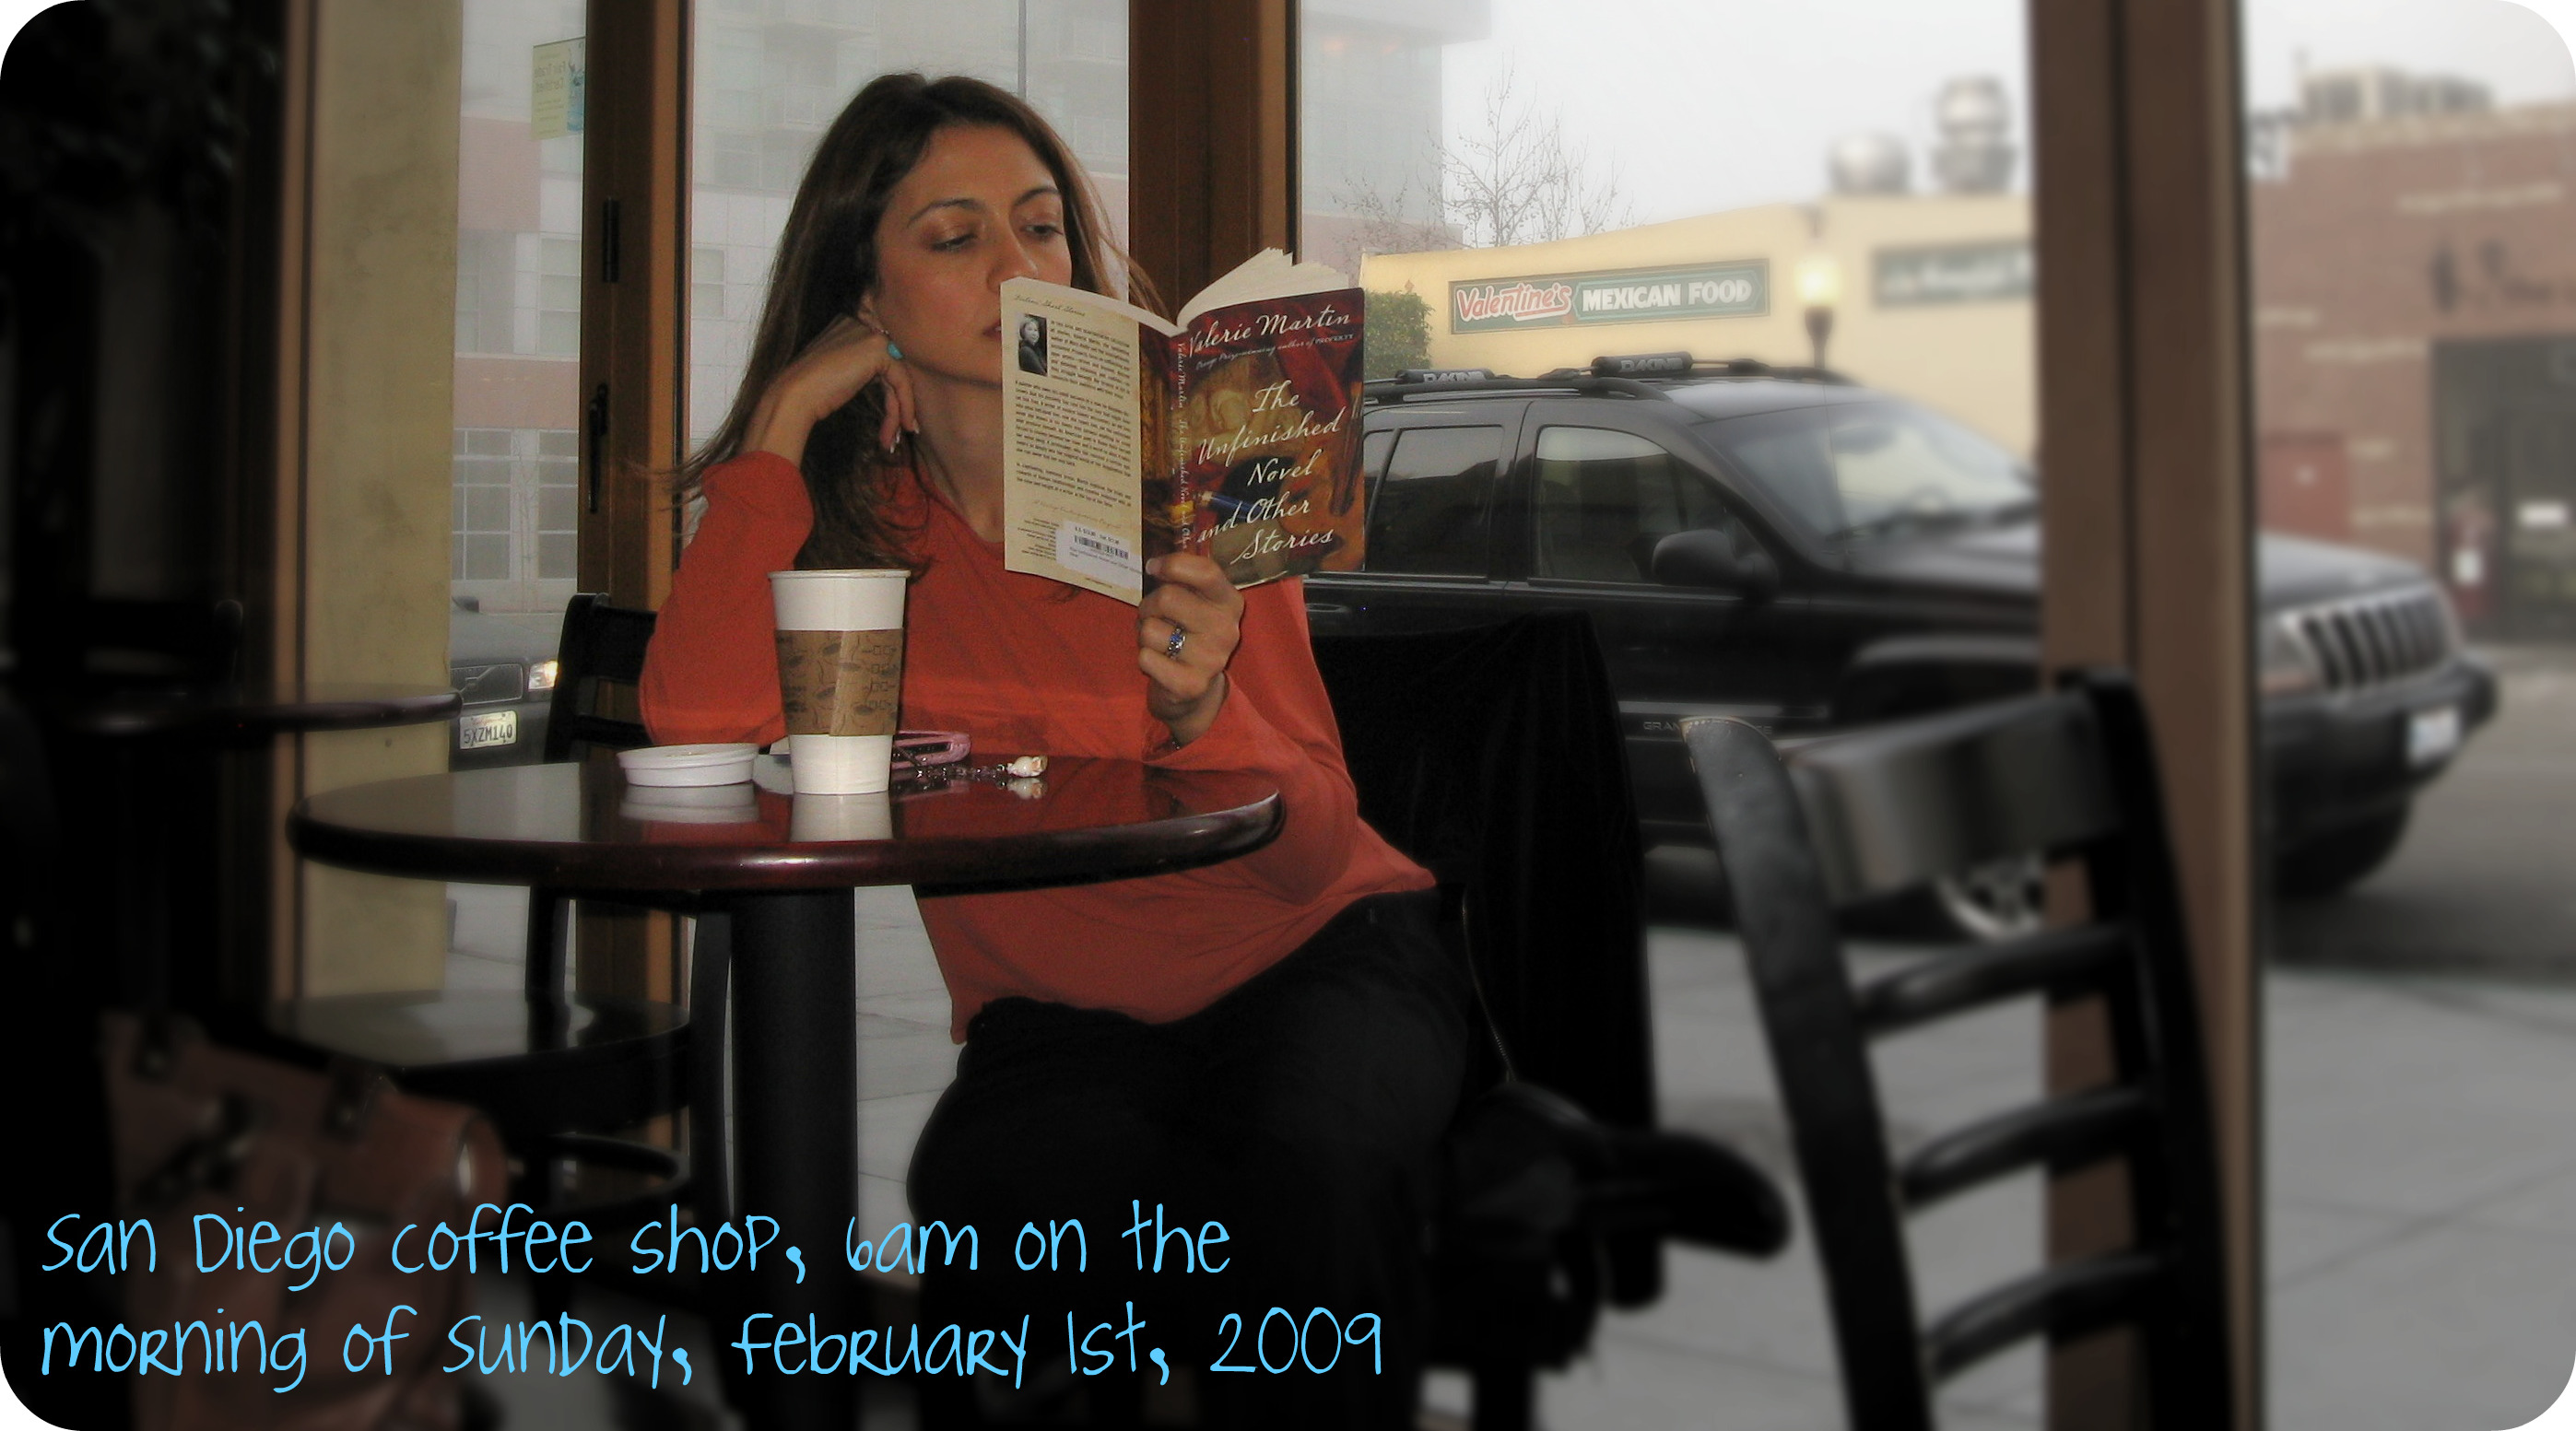 Reading Short Stories in San Diego Coffee Shop